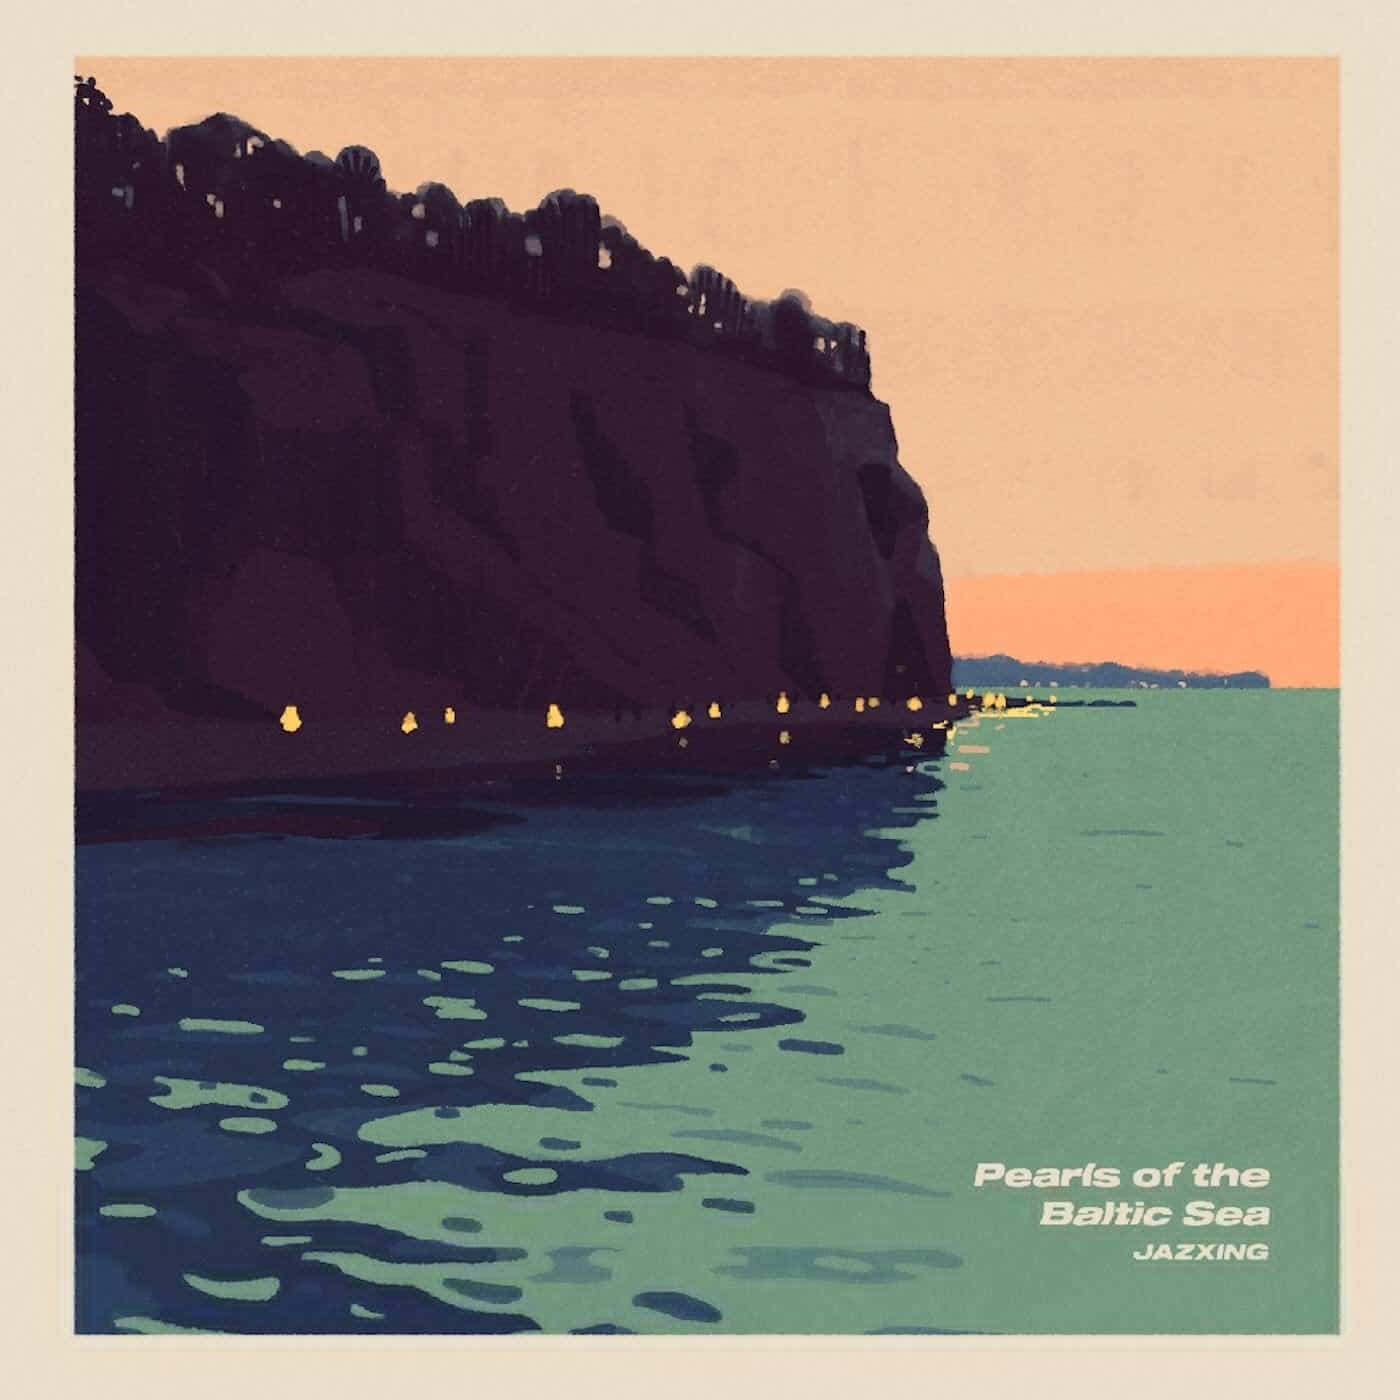 Download Jazxing - Pearls of The Baltic Sea on Electrobuzz